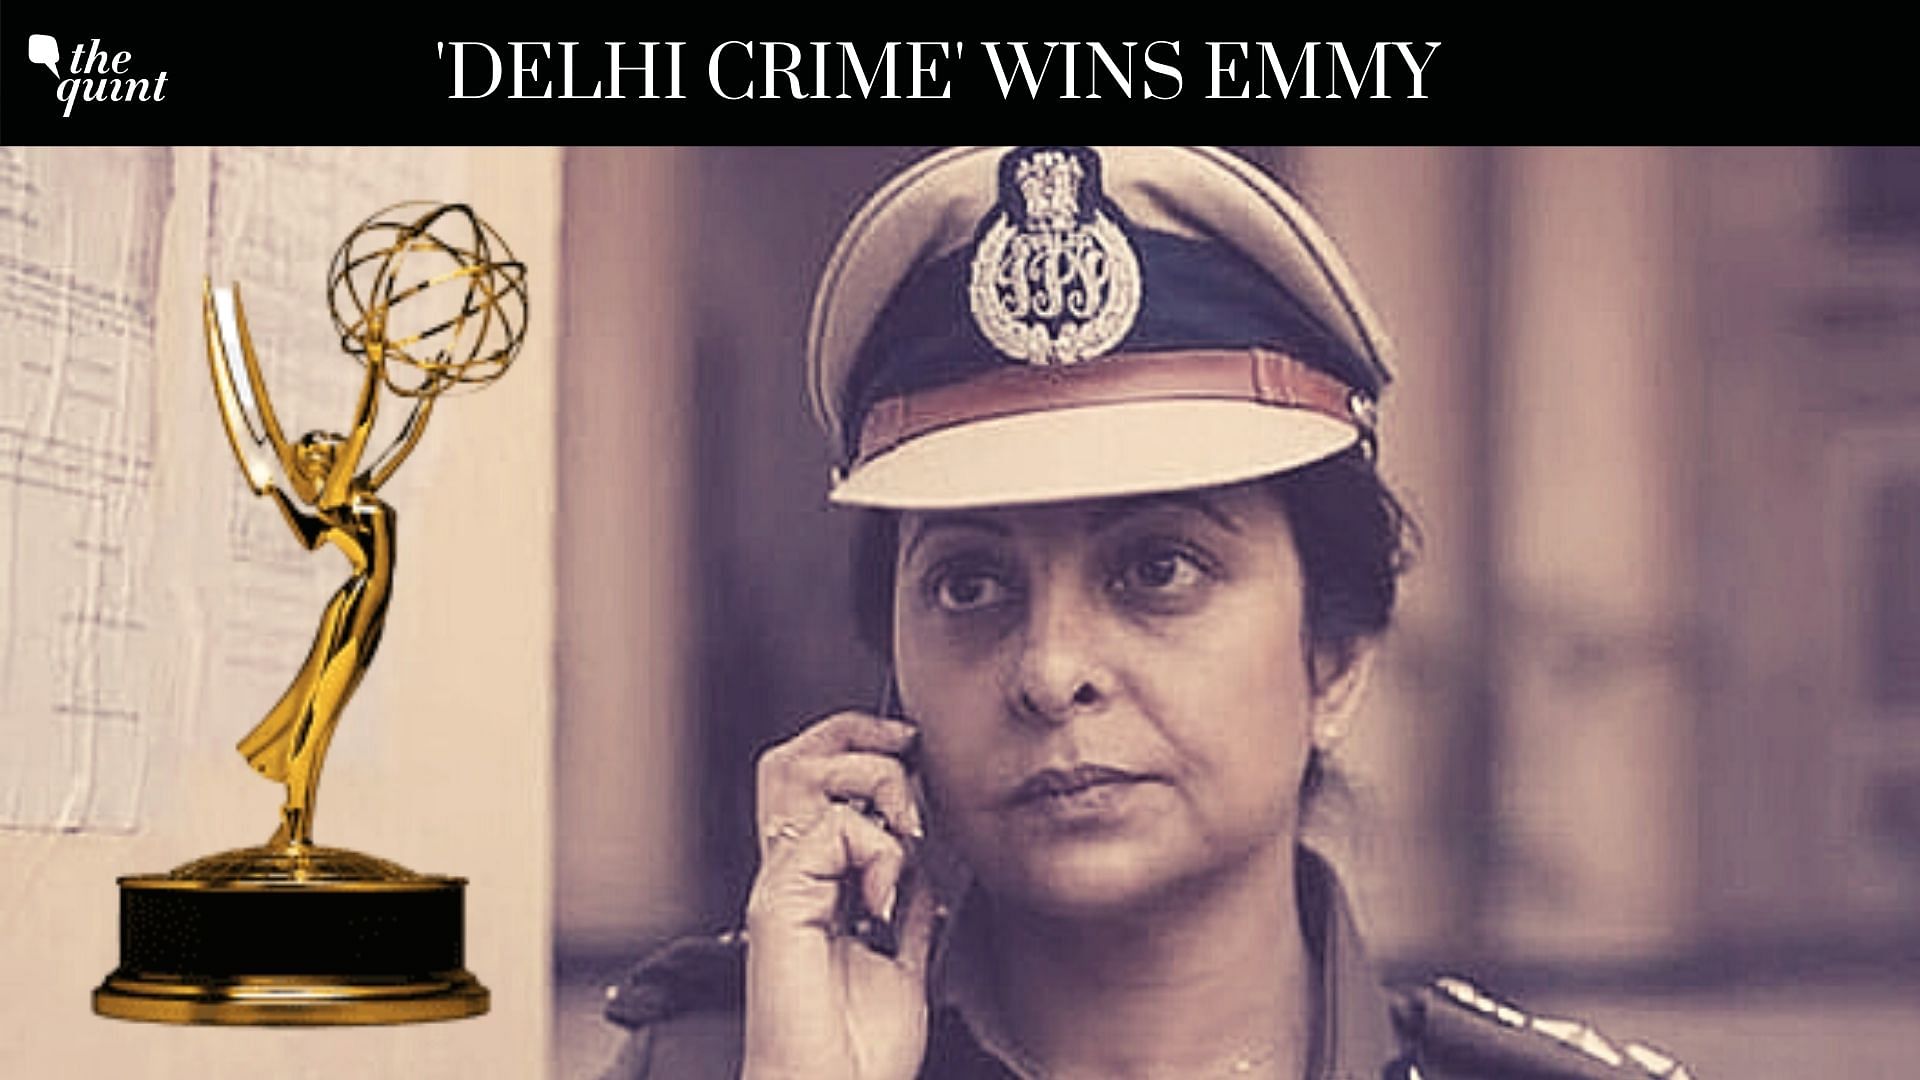 Netflix’s ‘Delhi Crime’ on Monday, 23 November bagged the International Emmy for Best Drama Series in 2020. The show is based on the 2012 Nirbhaya gangrape case of Delhi that had sent shockwaves across the nation.